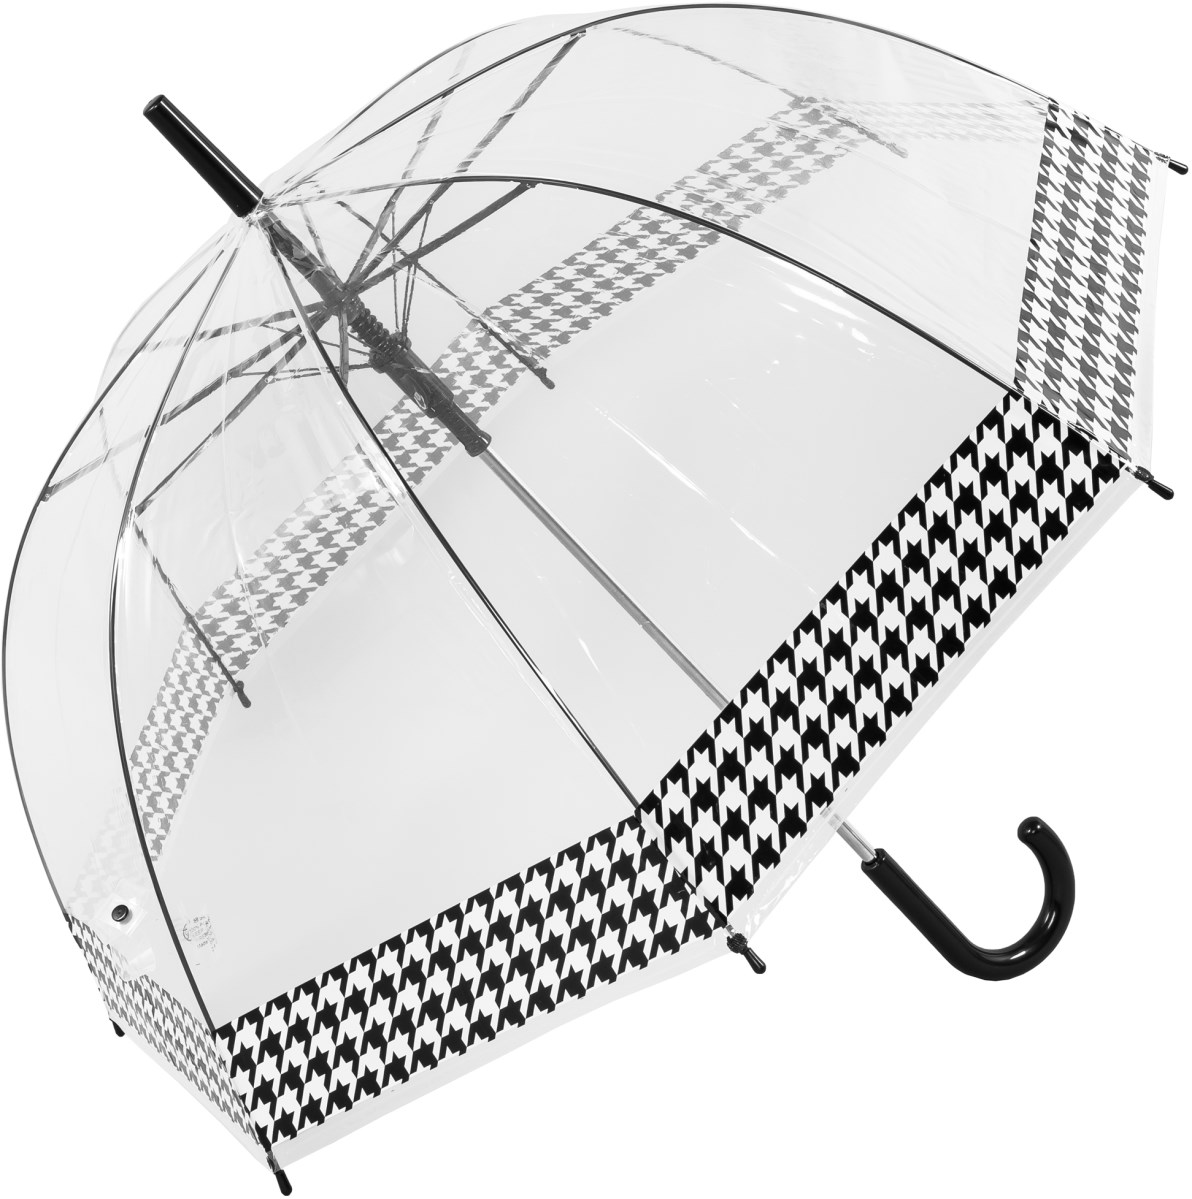 The Dogtooth Umbrella - a clear plastic dome umbrella, trimmed with a classic black and white houndstooth printed border